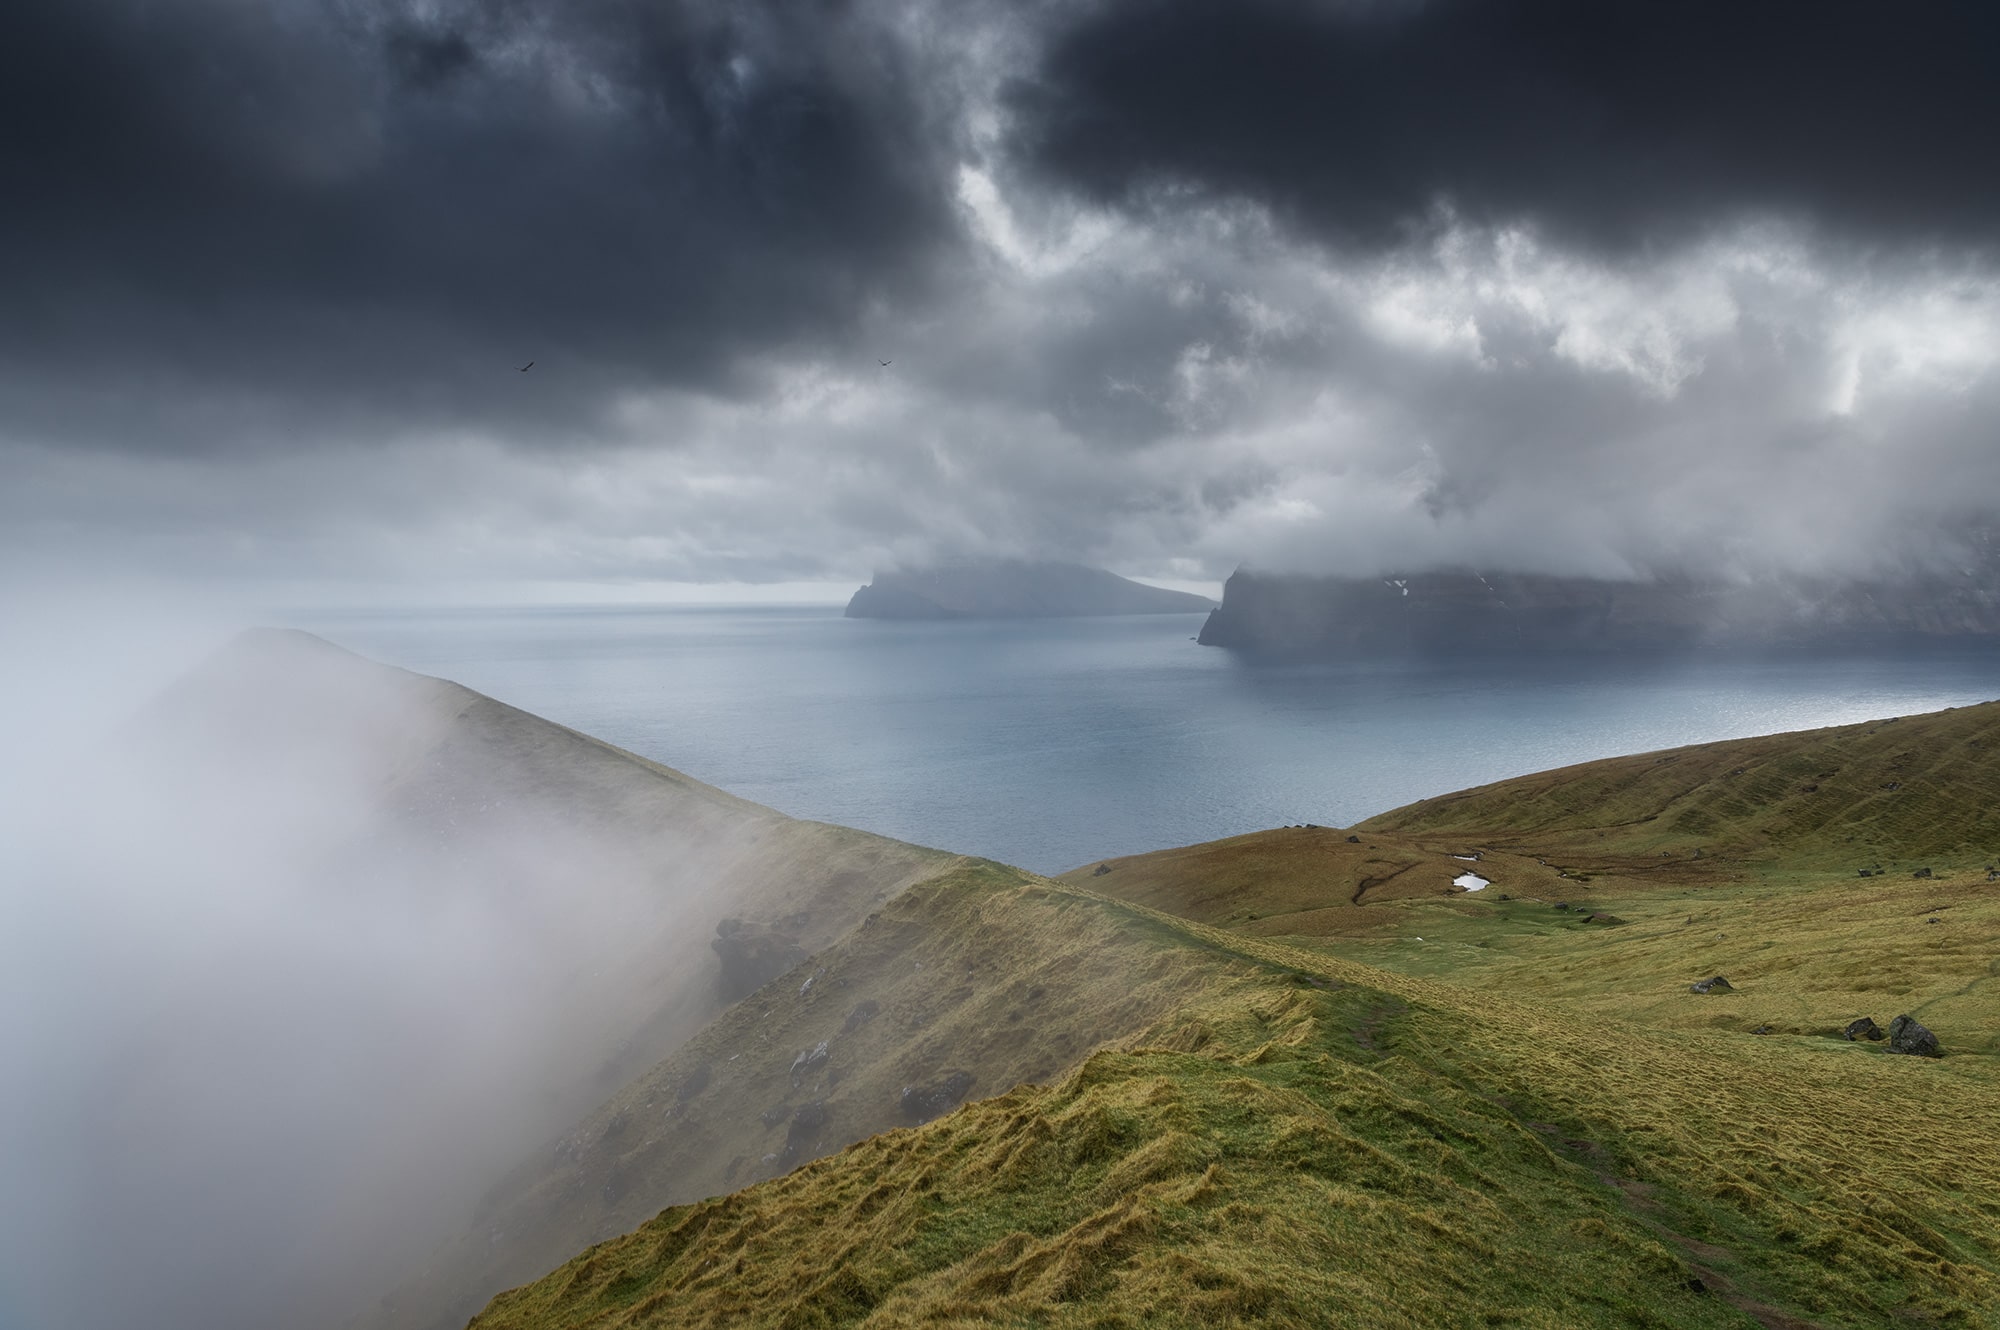 Embark on a visual odyssey through the captivating landscapes of the Faroe Islands with this striking landscape photograph. Behold the dramatic vista of the island of Kalsoy under a dark and brooding sky, characteristic of the epic scenery of this remote archipelago. This mesmerizing image encapsulates the raw beauty and rugged charm of the Faroe Islands, inviting viewers to immerse themselves in its breathtaking allure. Experience the magic of nature's drama unfolding through the lens of this evocative landscape photograph. Explore the timeless allure of the Faroe Islands in this captivating portrayal of its epic landscapes.